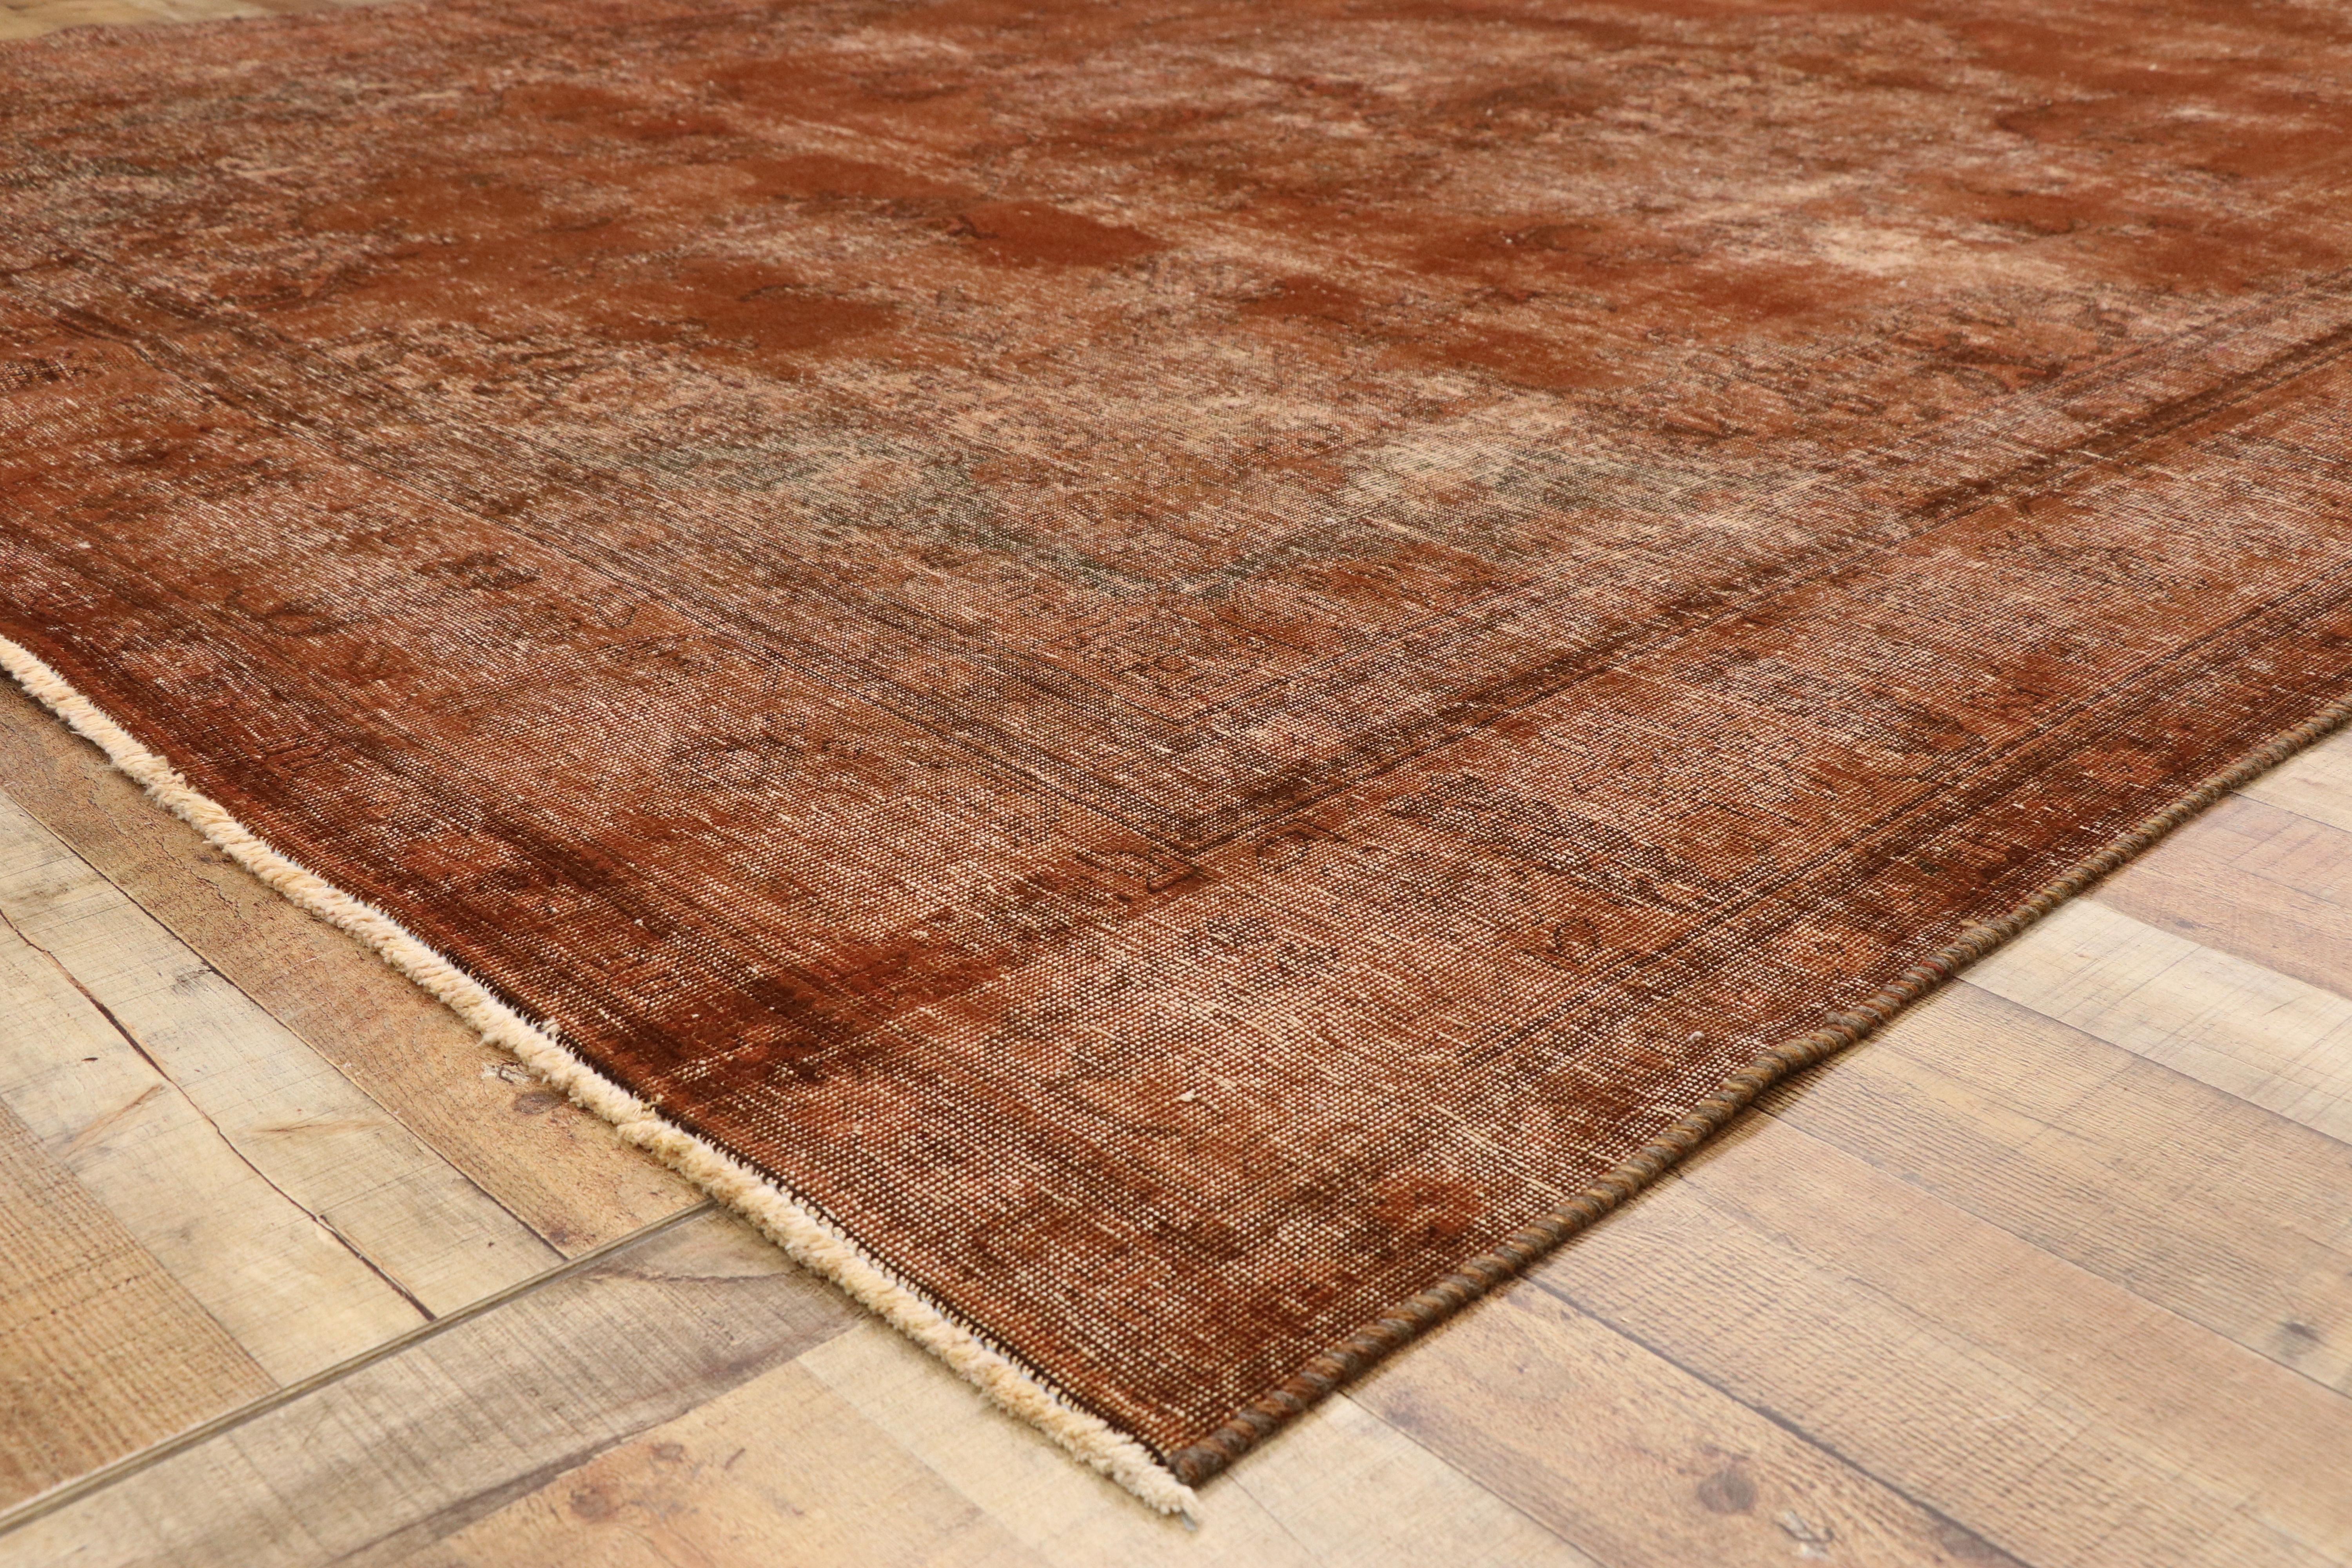 Autumn Maple Distressed Vintage Turkish Rug with Rustic Industrial Luxe Style 1